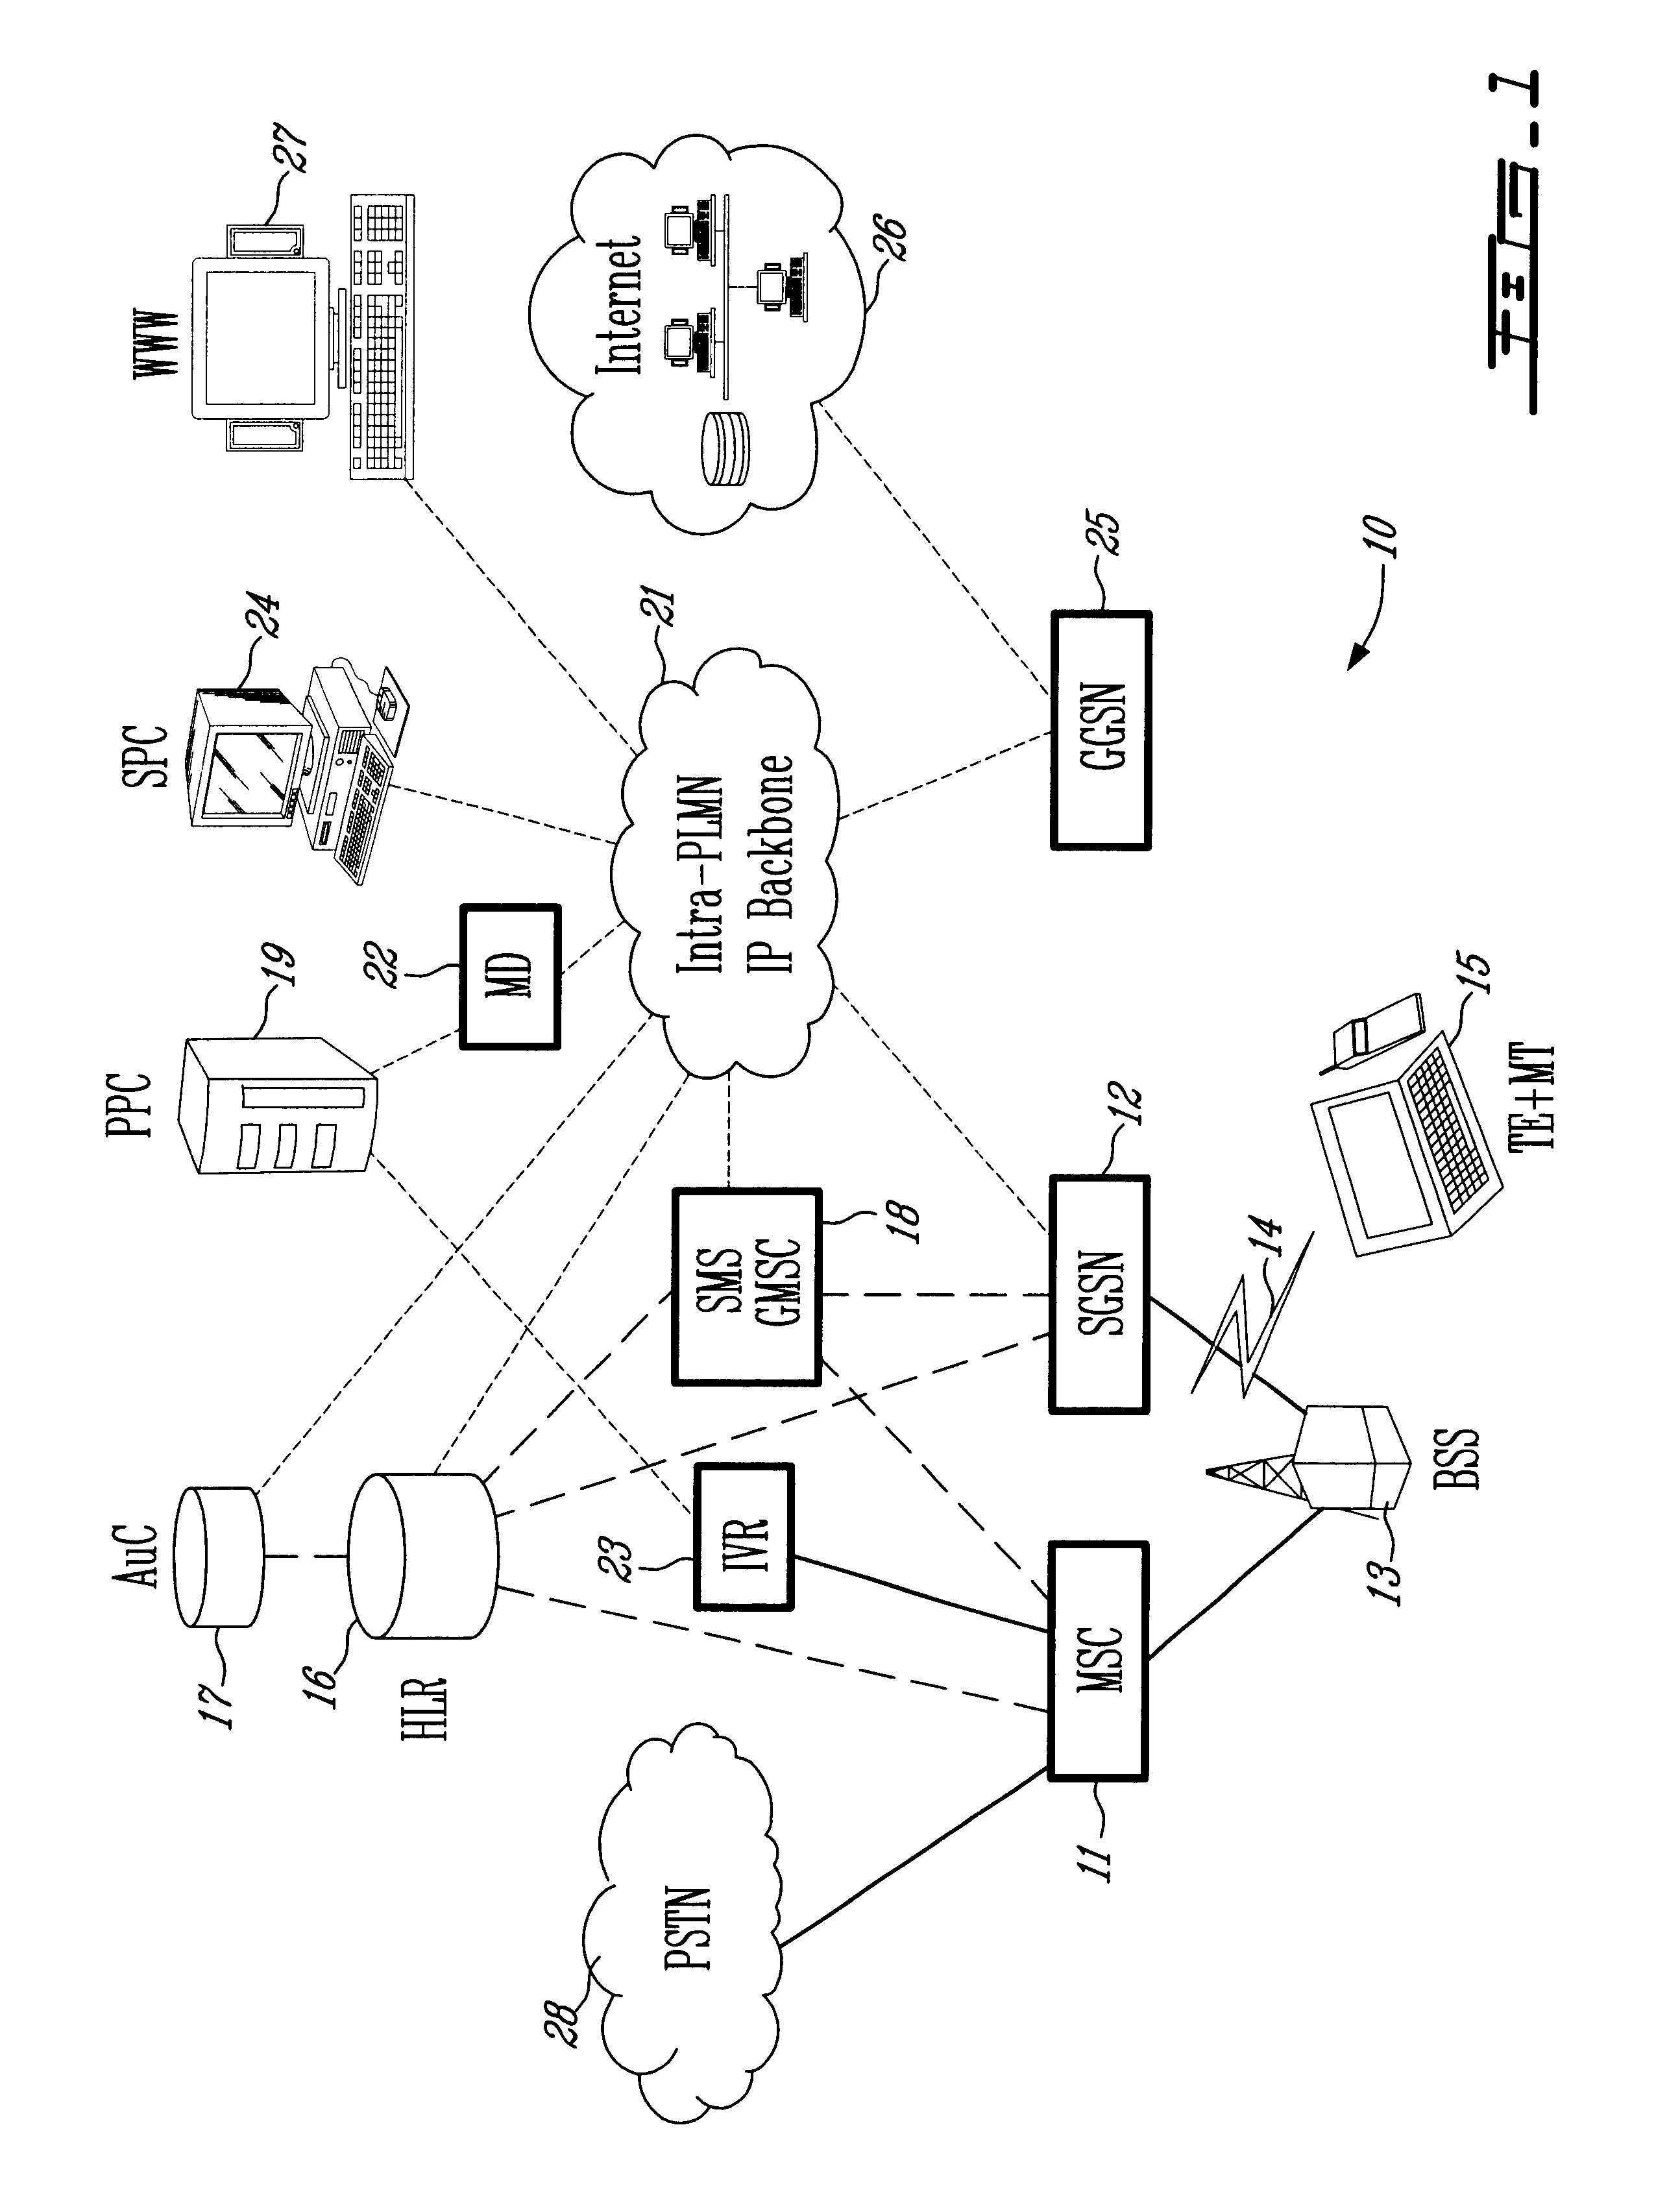 Prepaid subscriber service for packet-switched and circuit-switched radio telecommunications networks